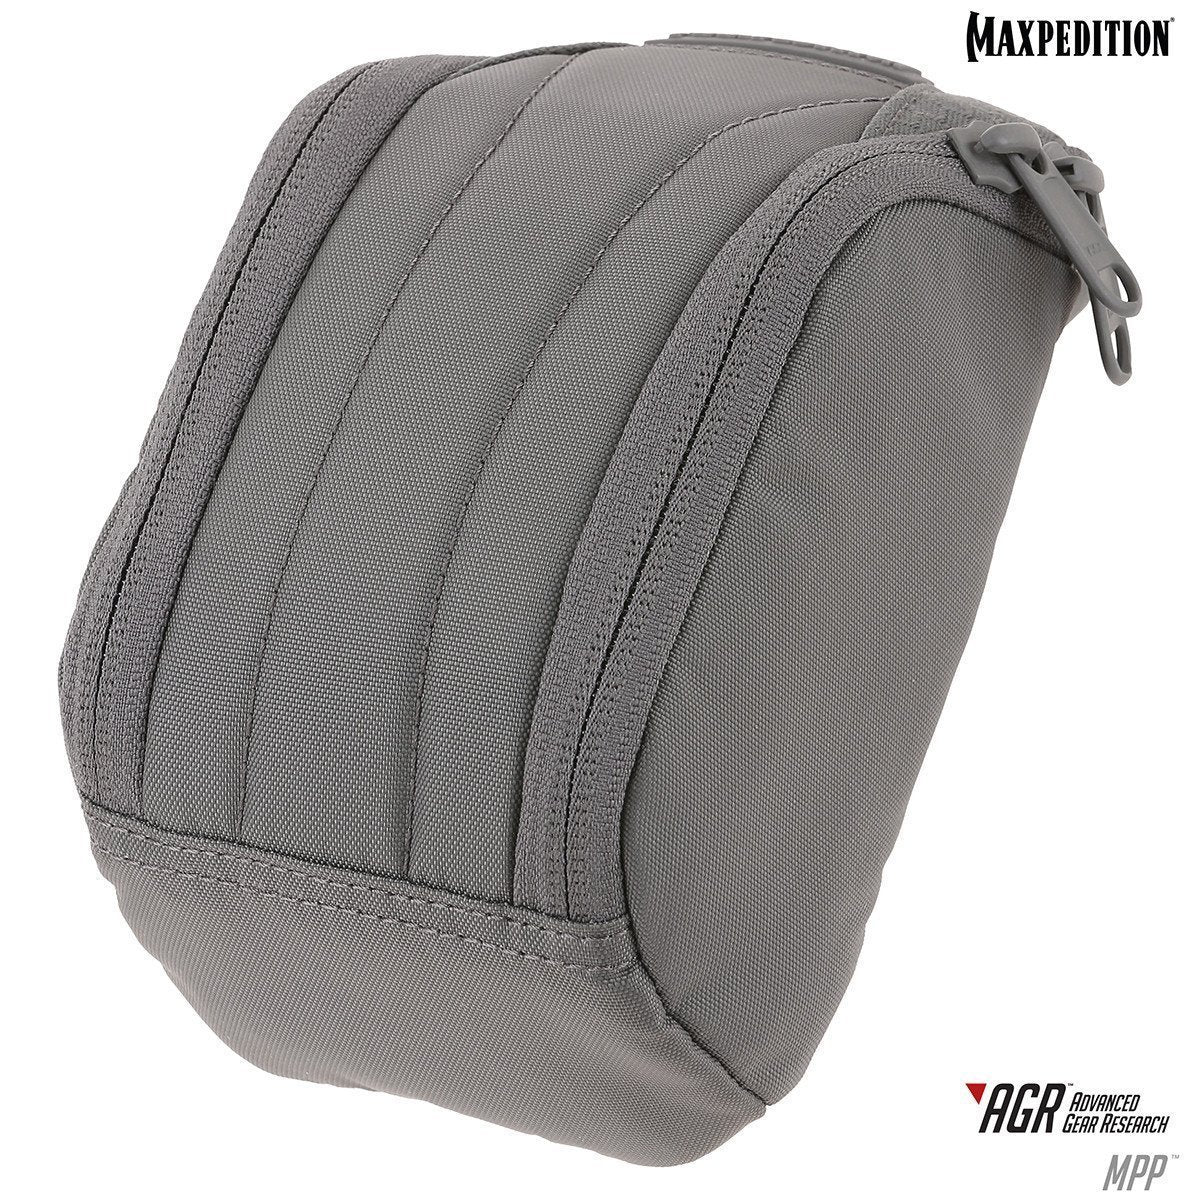 MPP™ Medium Padded Pouch | Maxpedition  Tactical Gear